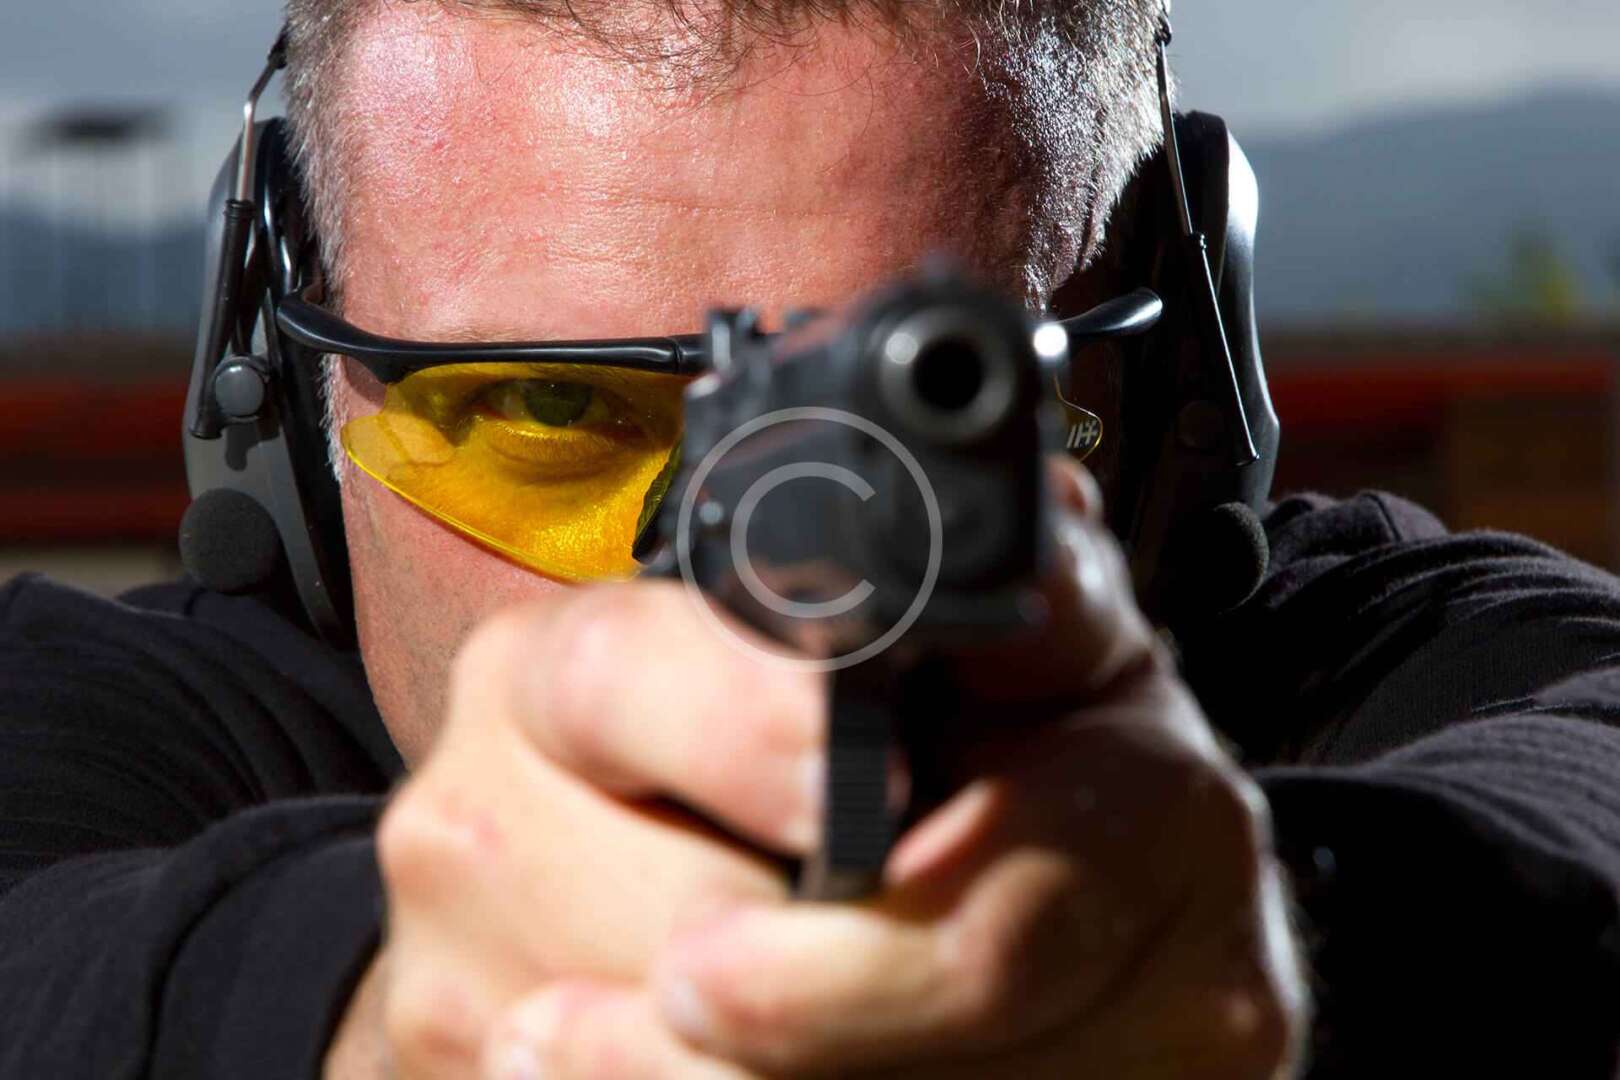 A man is holding a gun and aiming at a target.